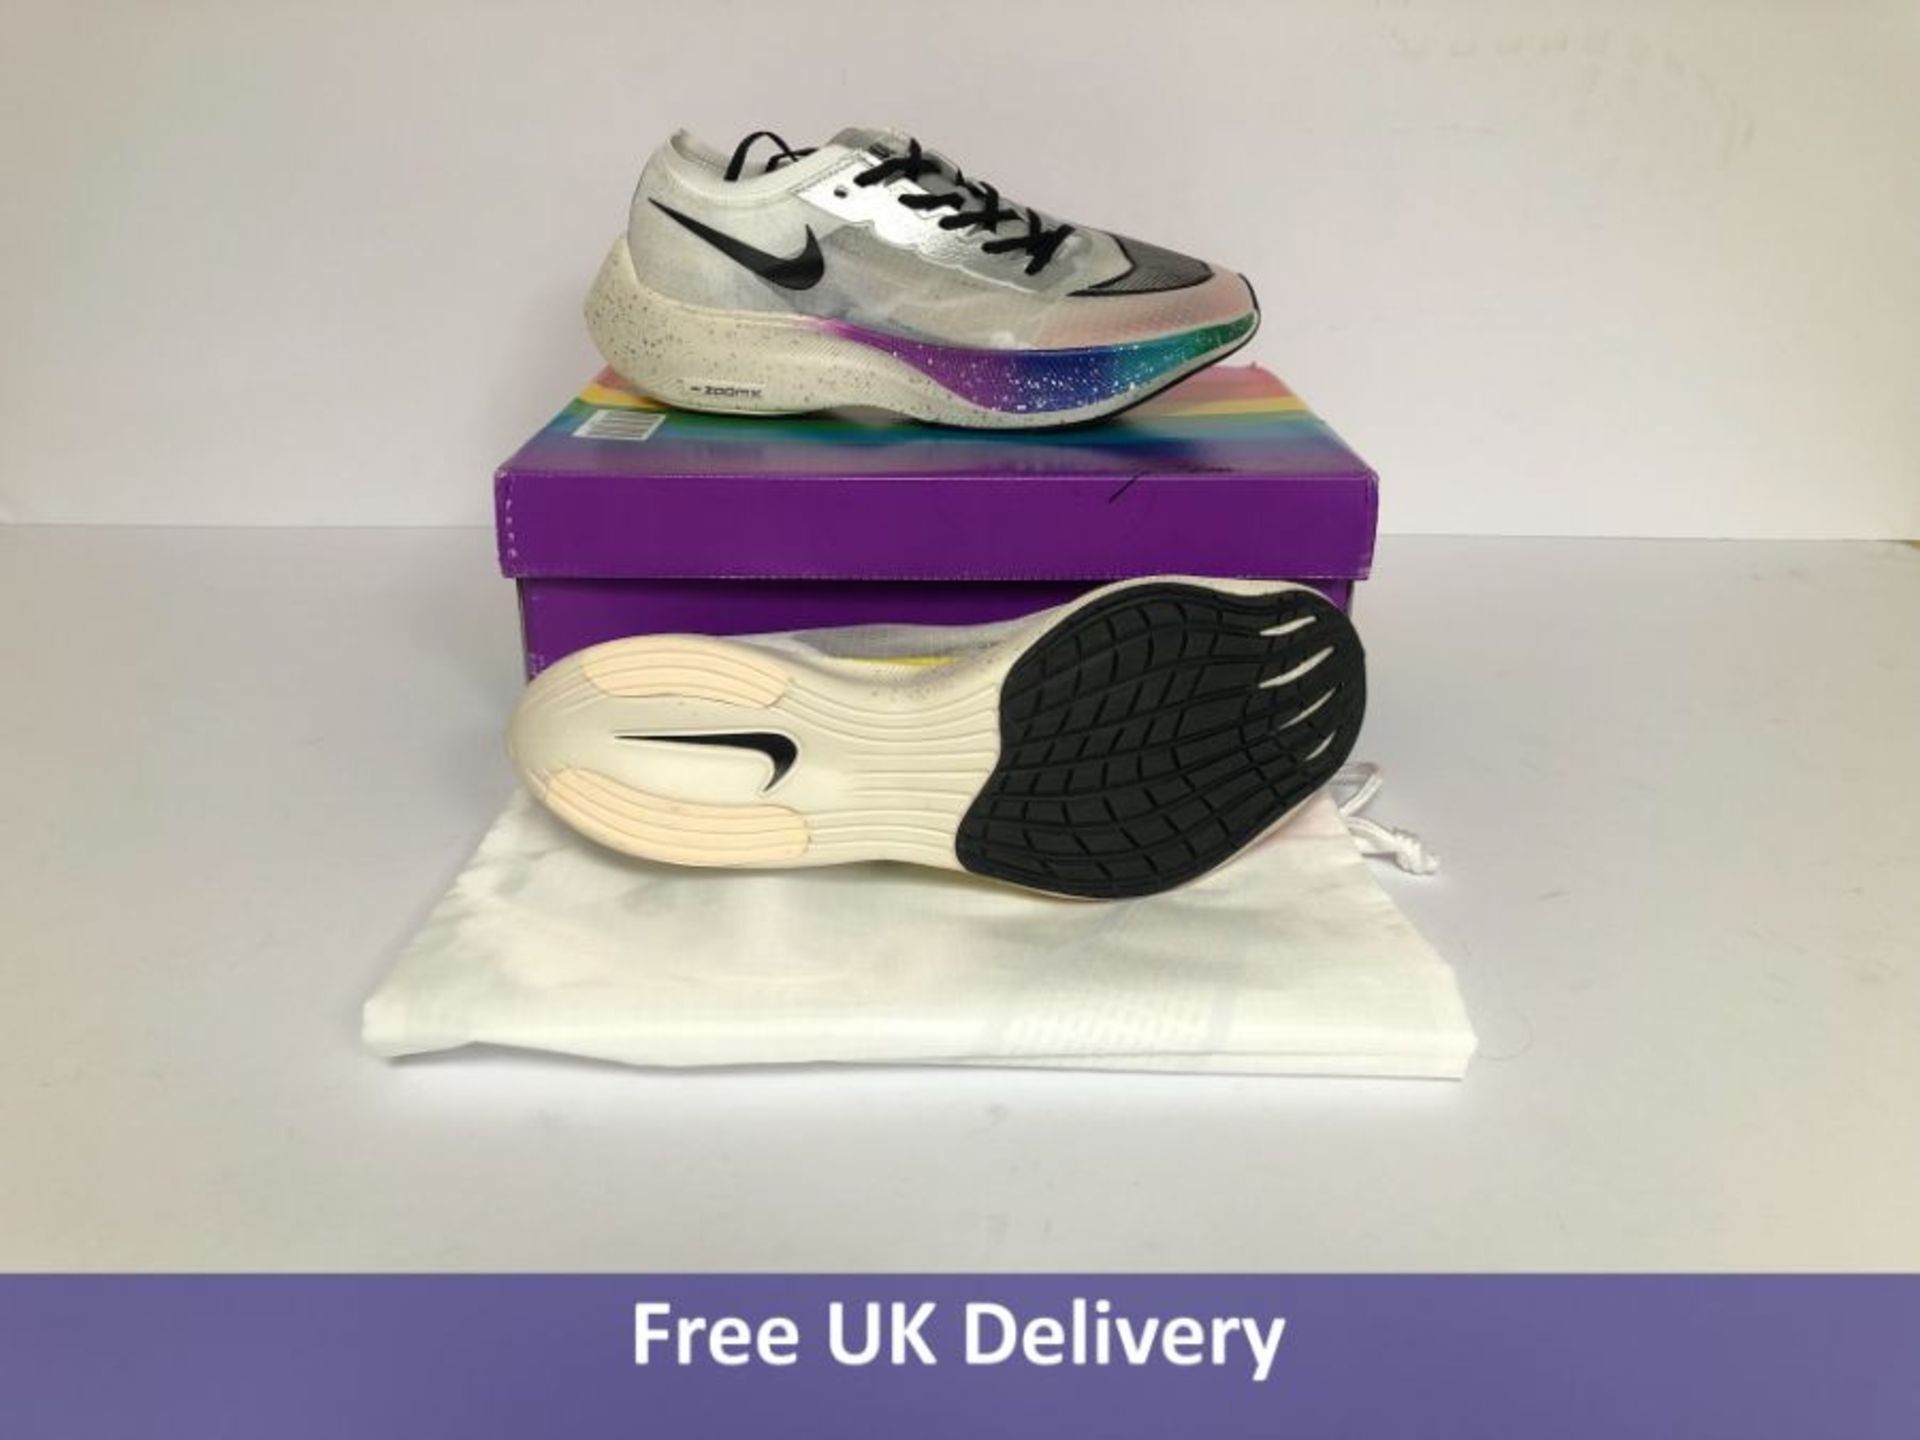 Nike Women's ZoomX Vaporfly Next Trainers, White and Multicoloured, UK 8